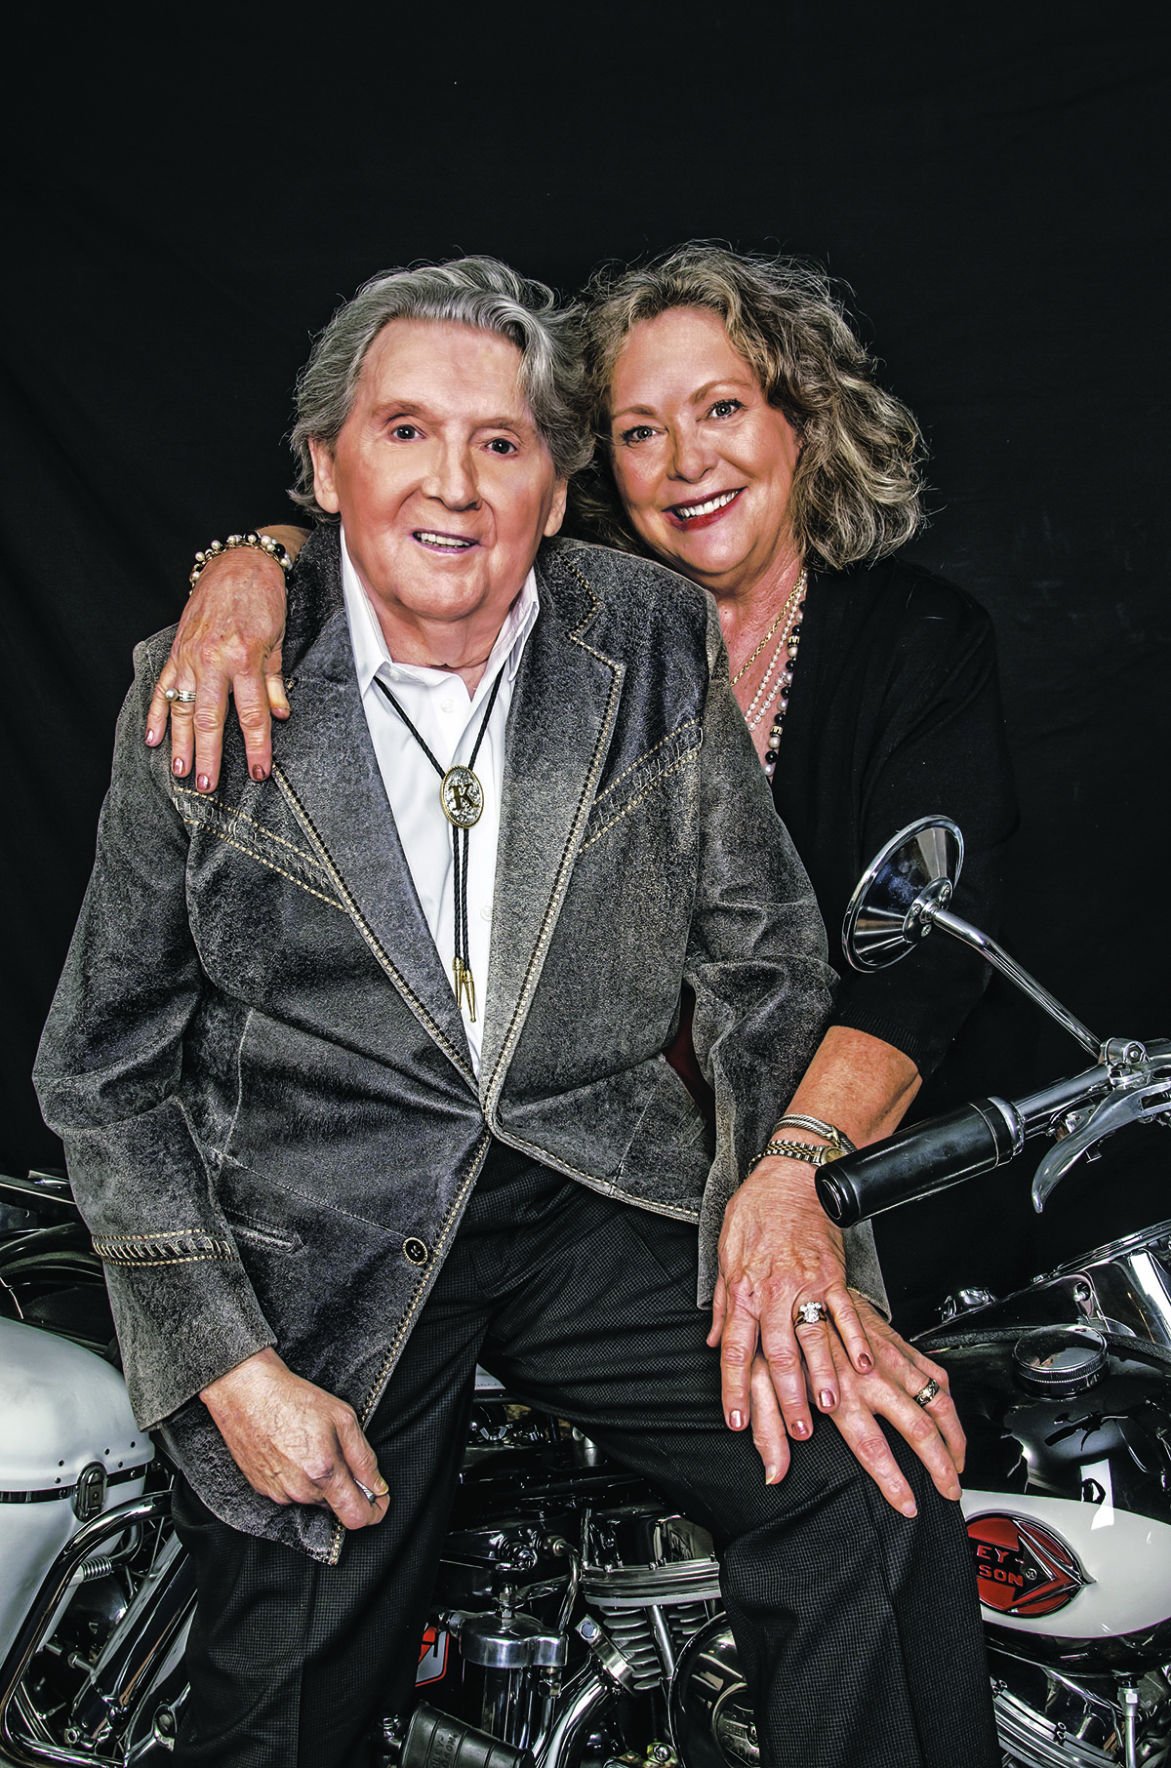 In Rick Bragg’s new biography, 79-year-old Jerry Lee Lewis looks back on a life spent raising ...